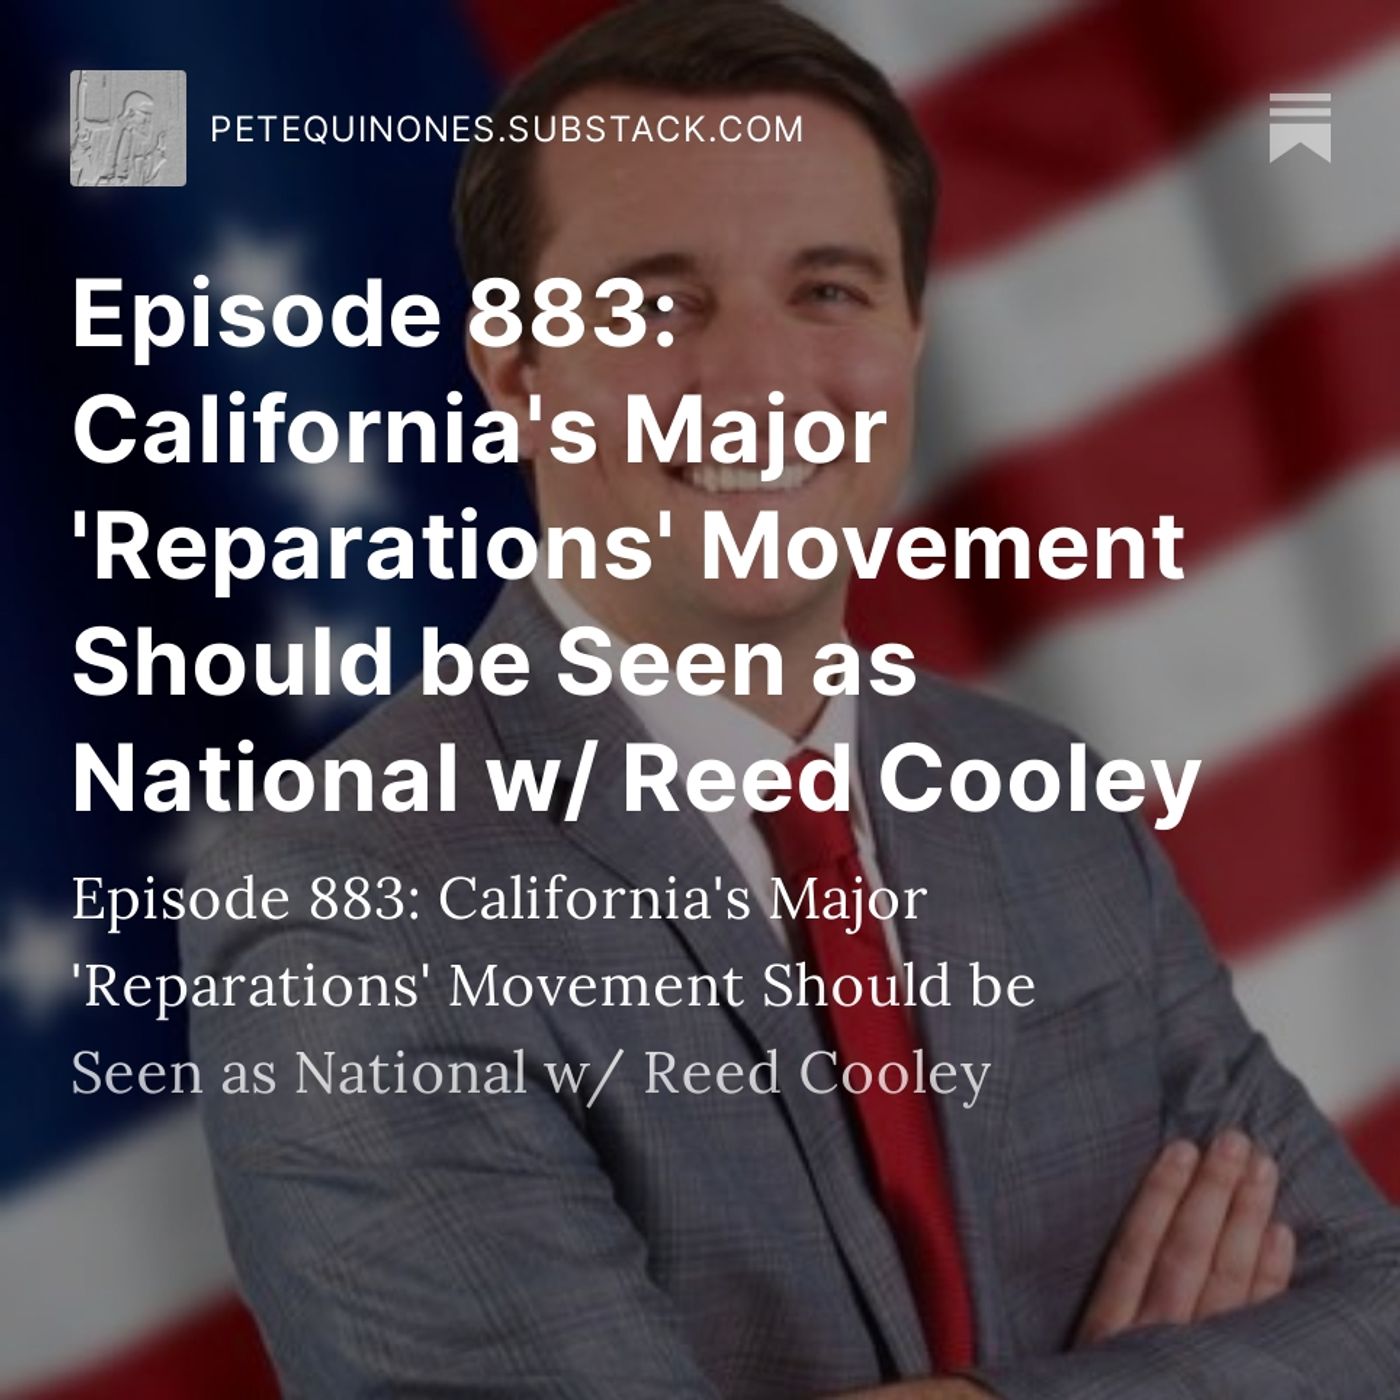 Episode 883: California's 'Reparations' Movement Should be Seen as National w/ Reed Cooley